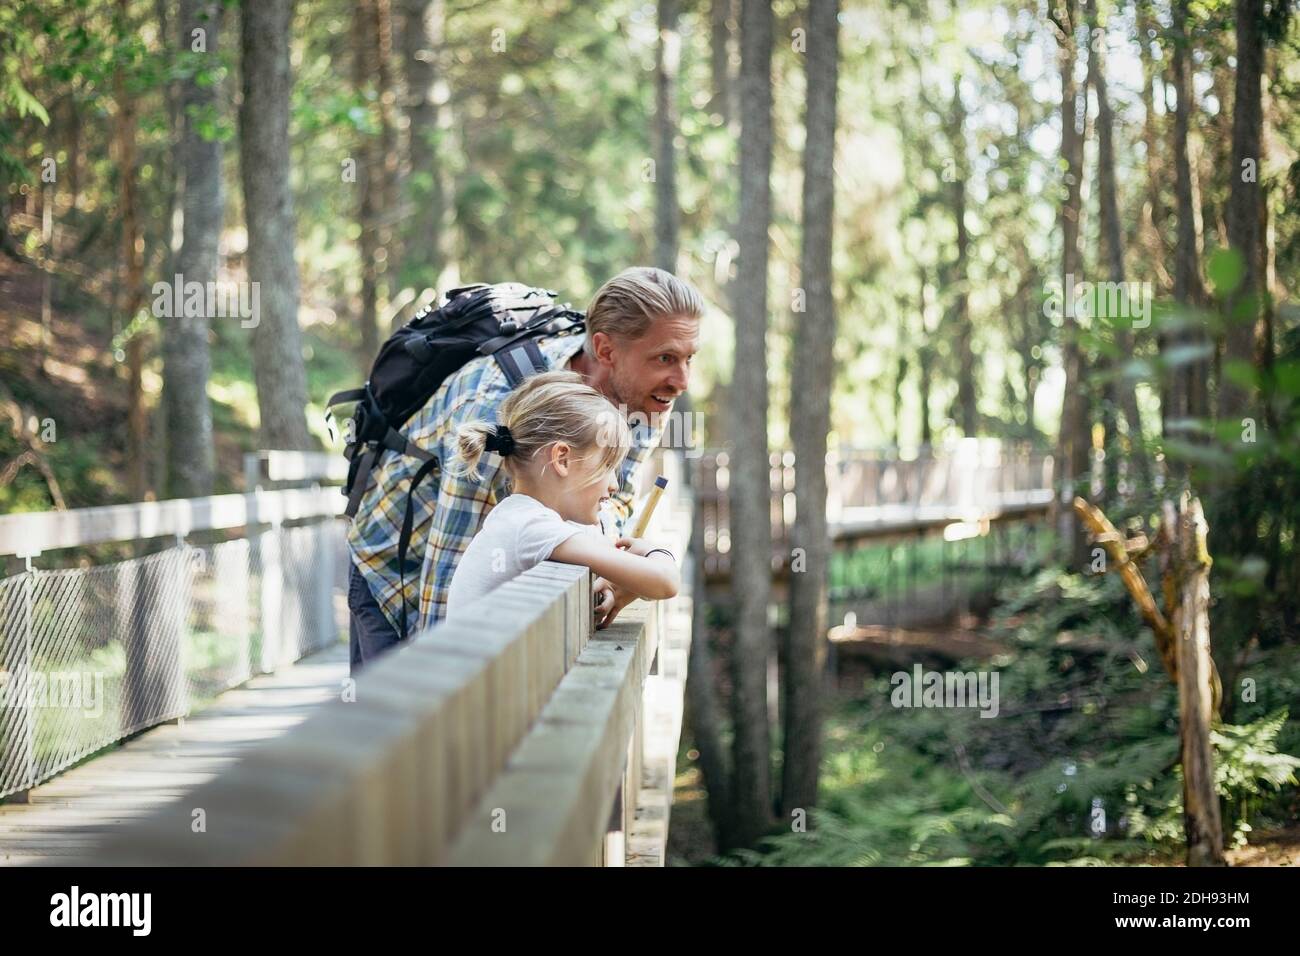 Smiling father with backpack talking to daughter on footbridge in forest Stock Photo